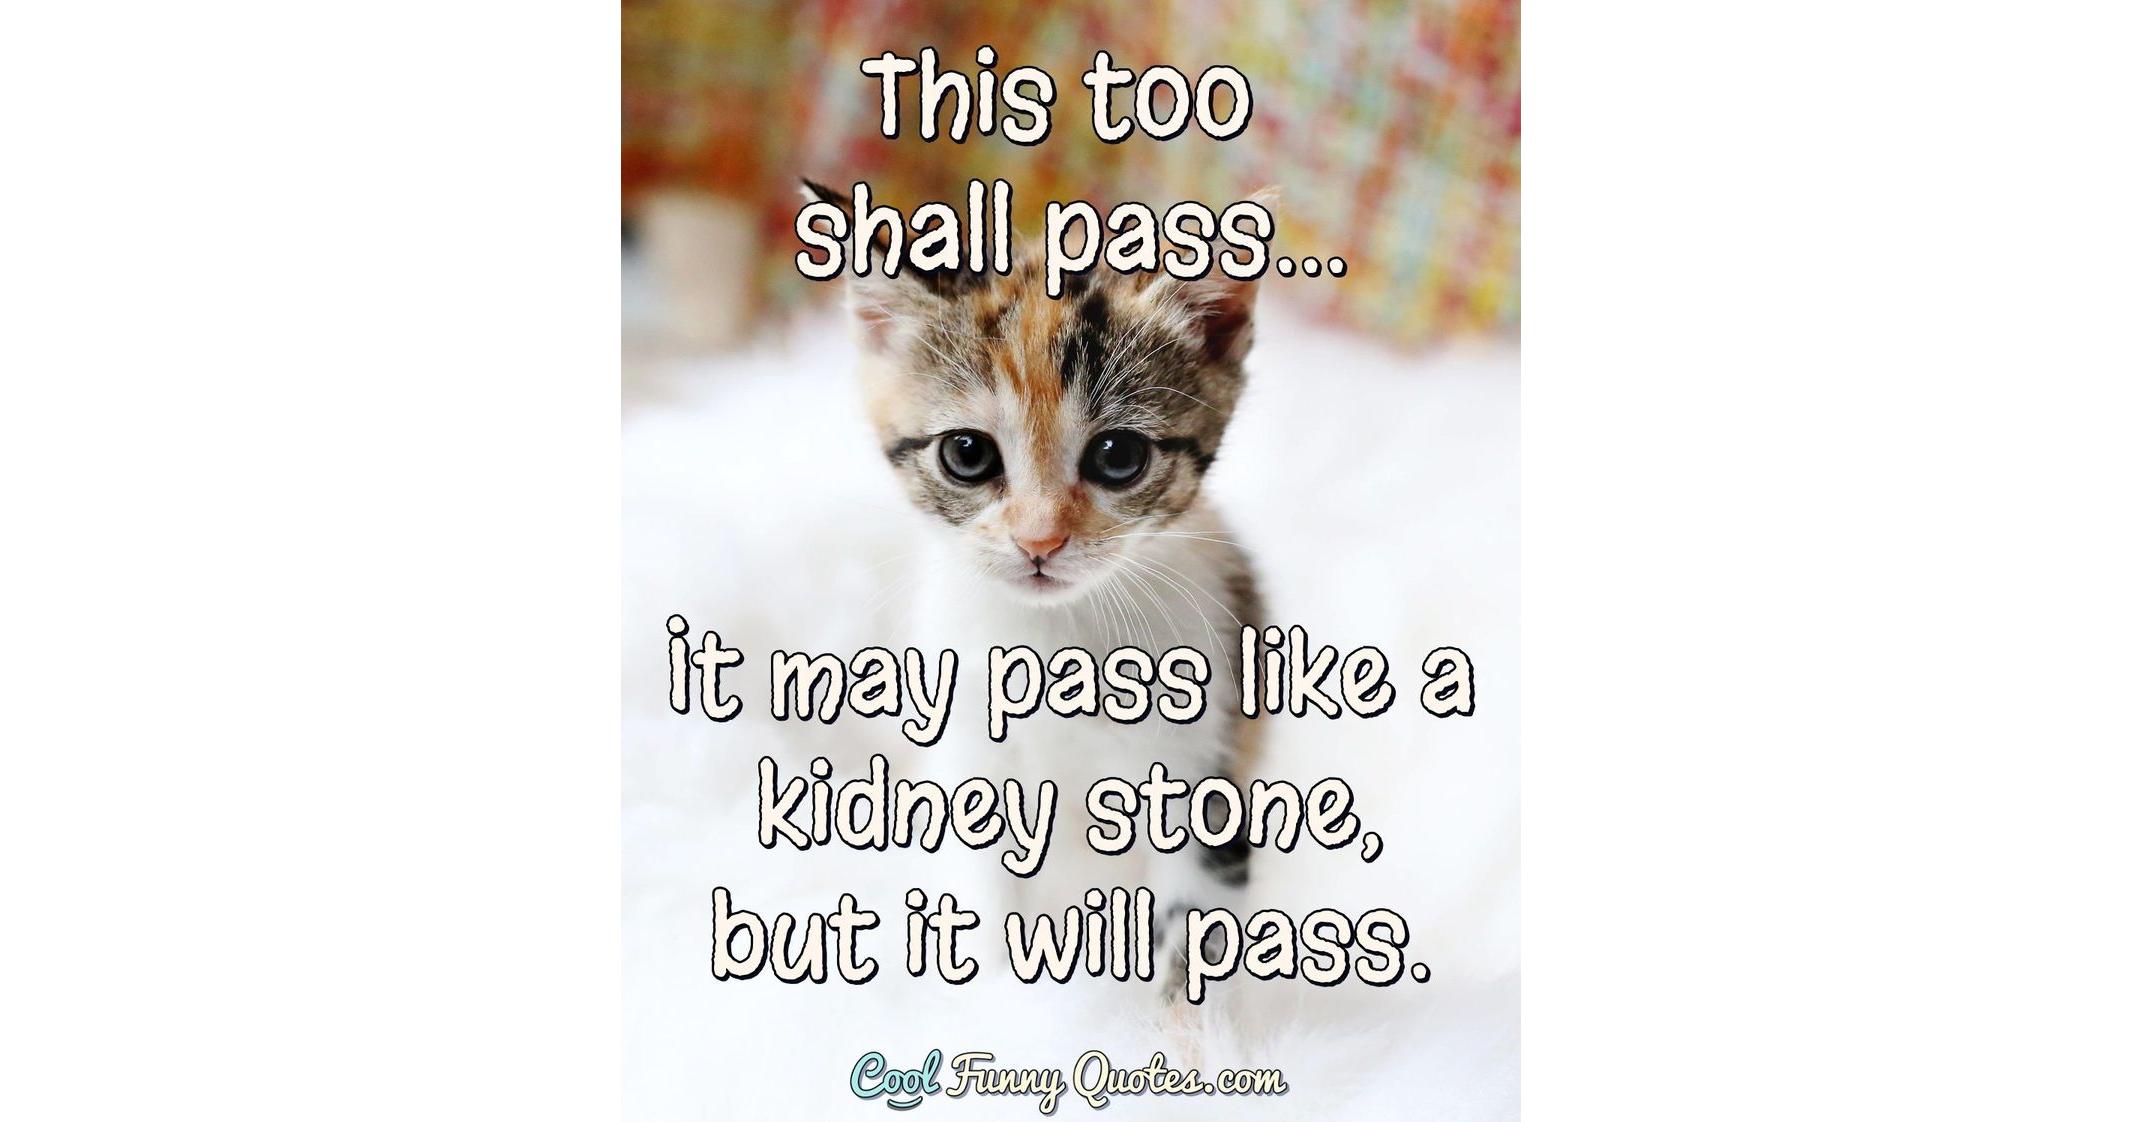 This too shall pass... It may pass like a kidney stone, but it will pass.